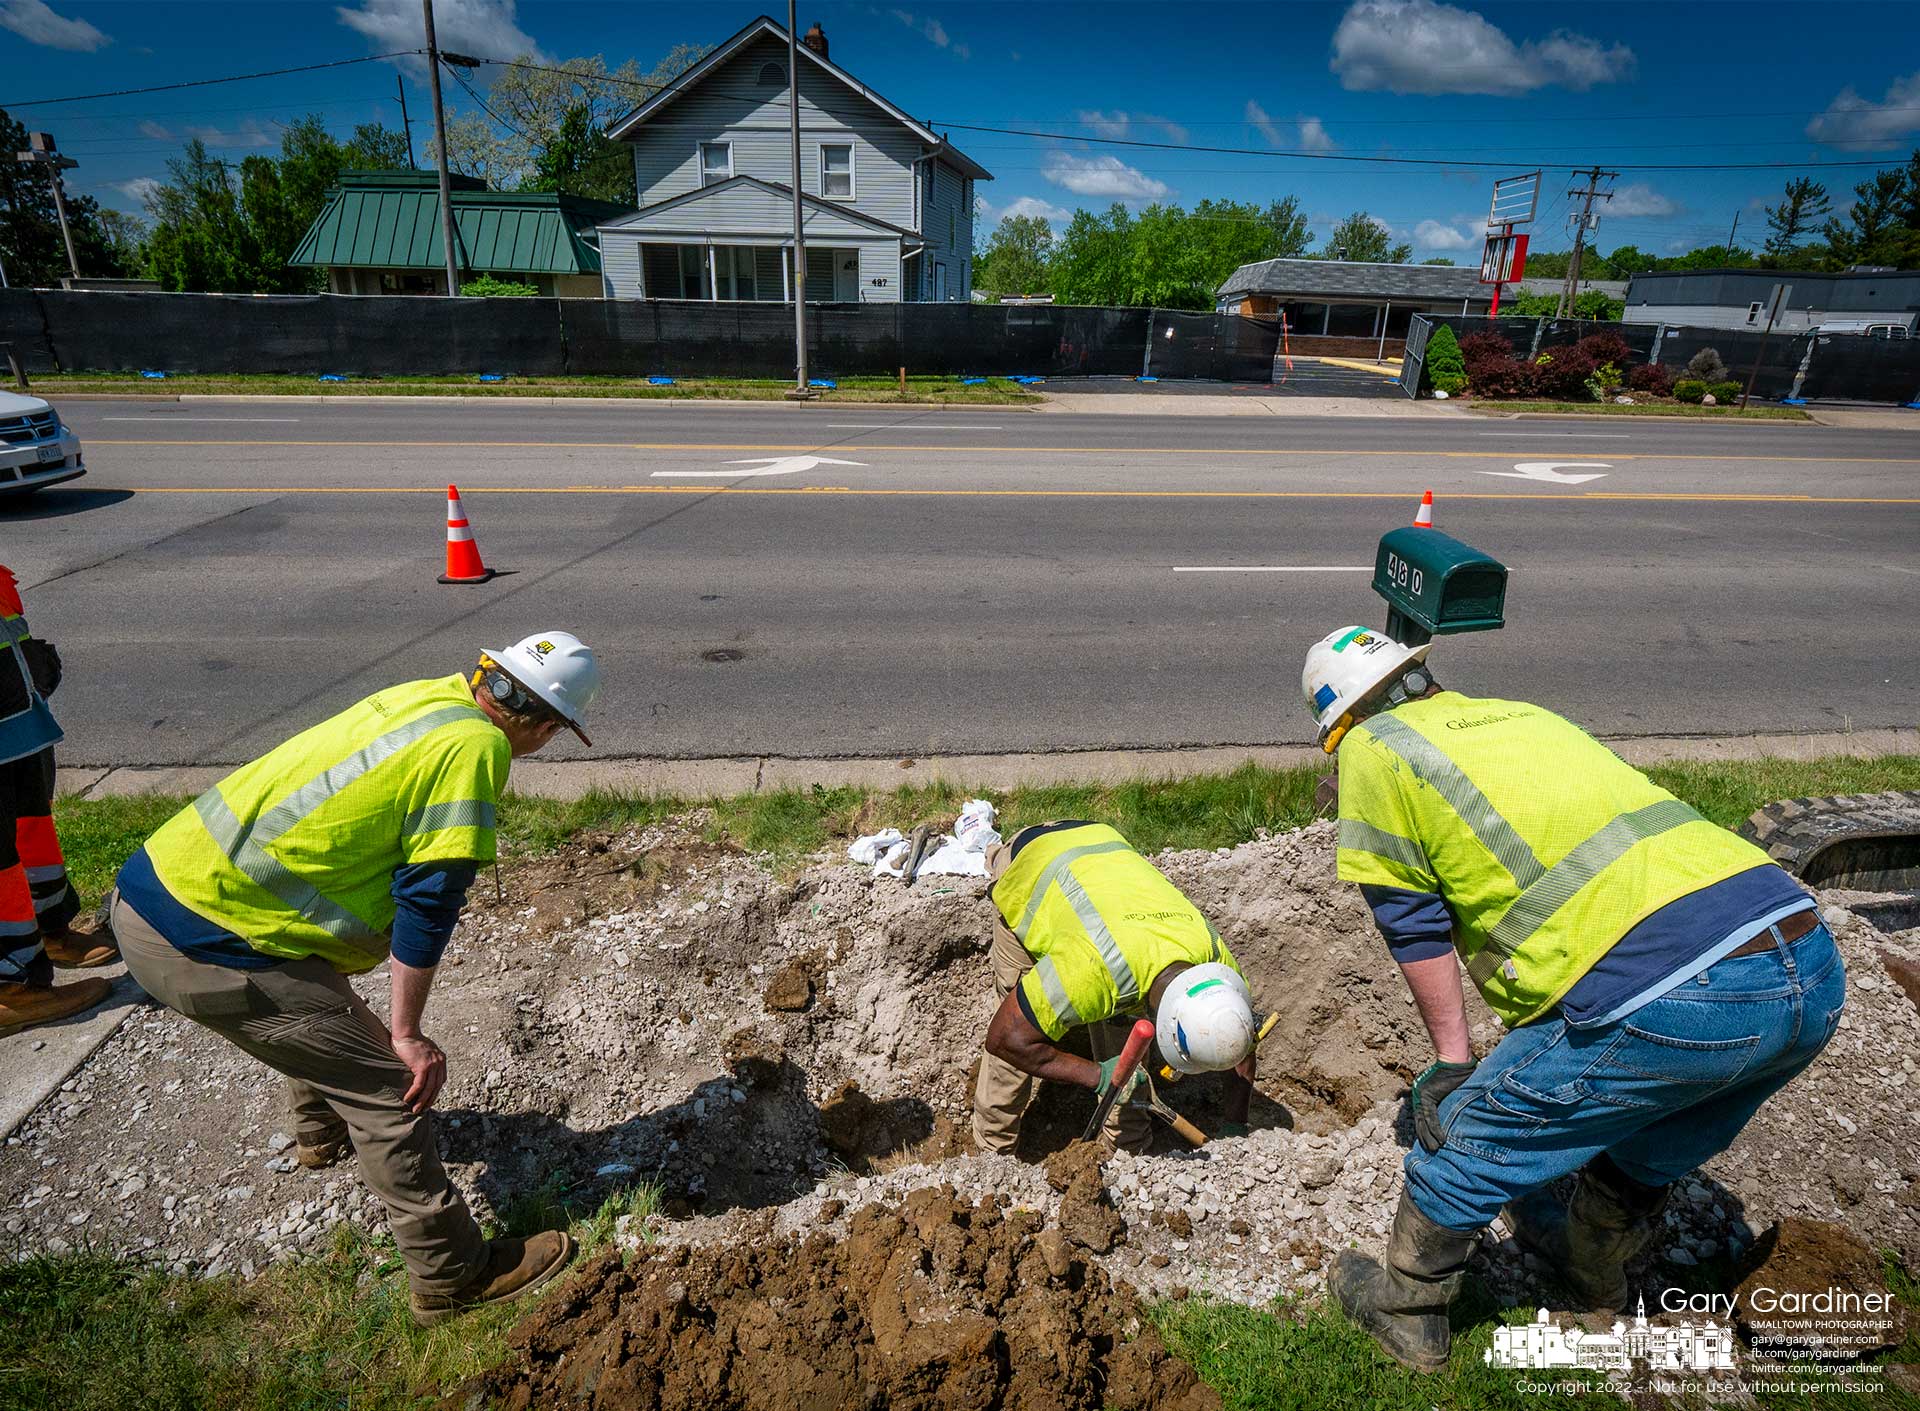 Columbia Gas workers search for a connection to cap off the gas line that feeds a house across the street that is set for demolition to make way for a Dunkin doughnuts drive-through restaurant on South State Street. My Final Photo for May 16, 2022.